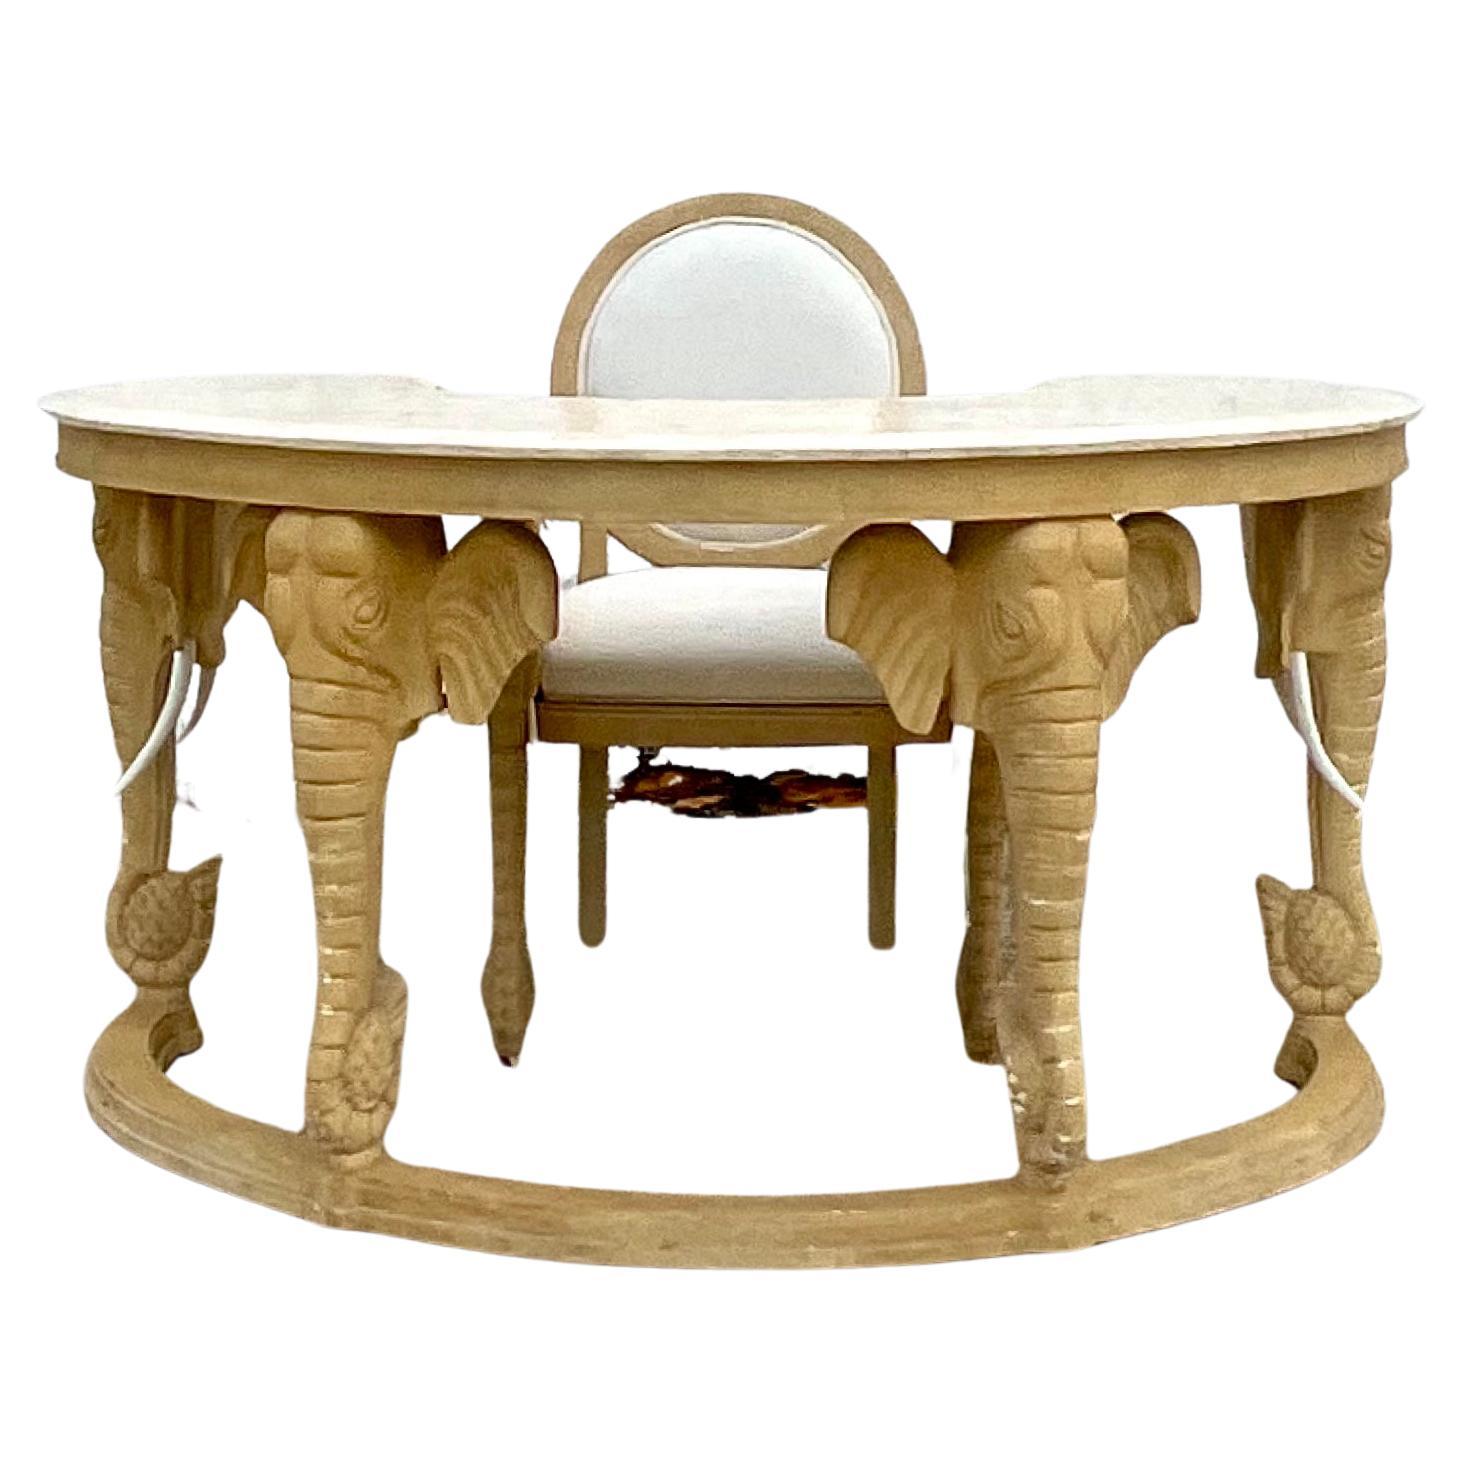 Regency Tessellated Stone Curved Elephant Desk and Matching Chair